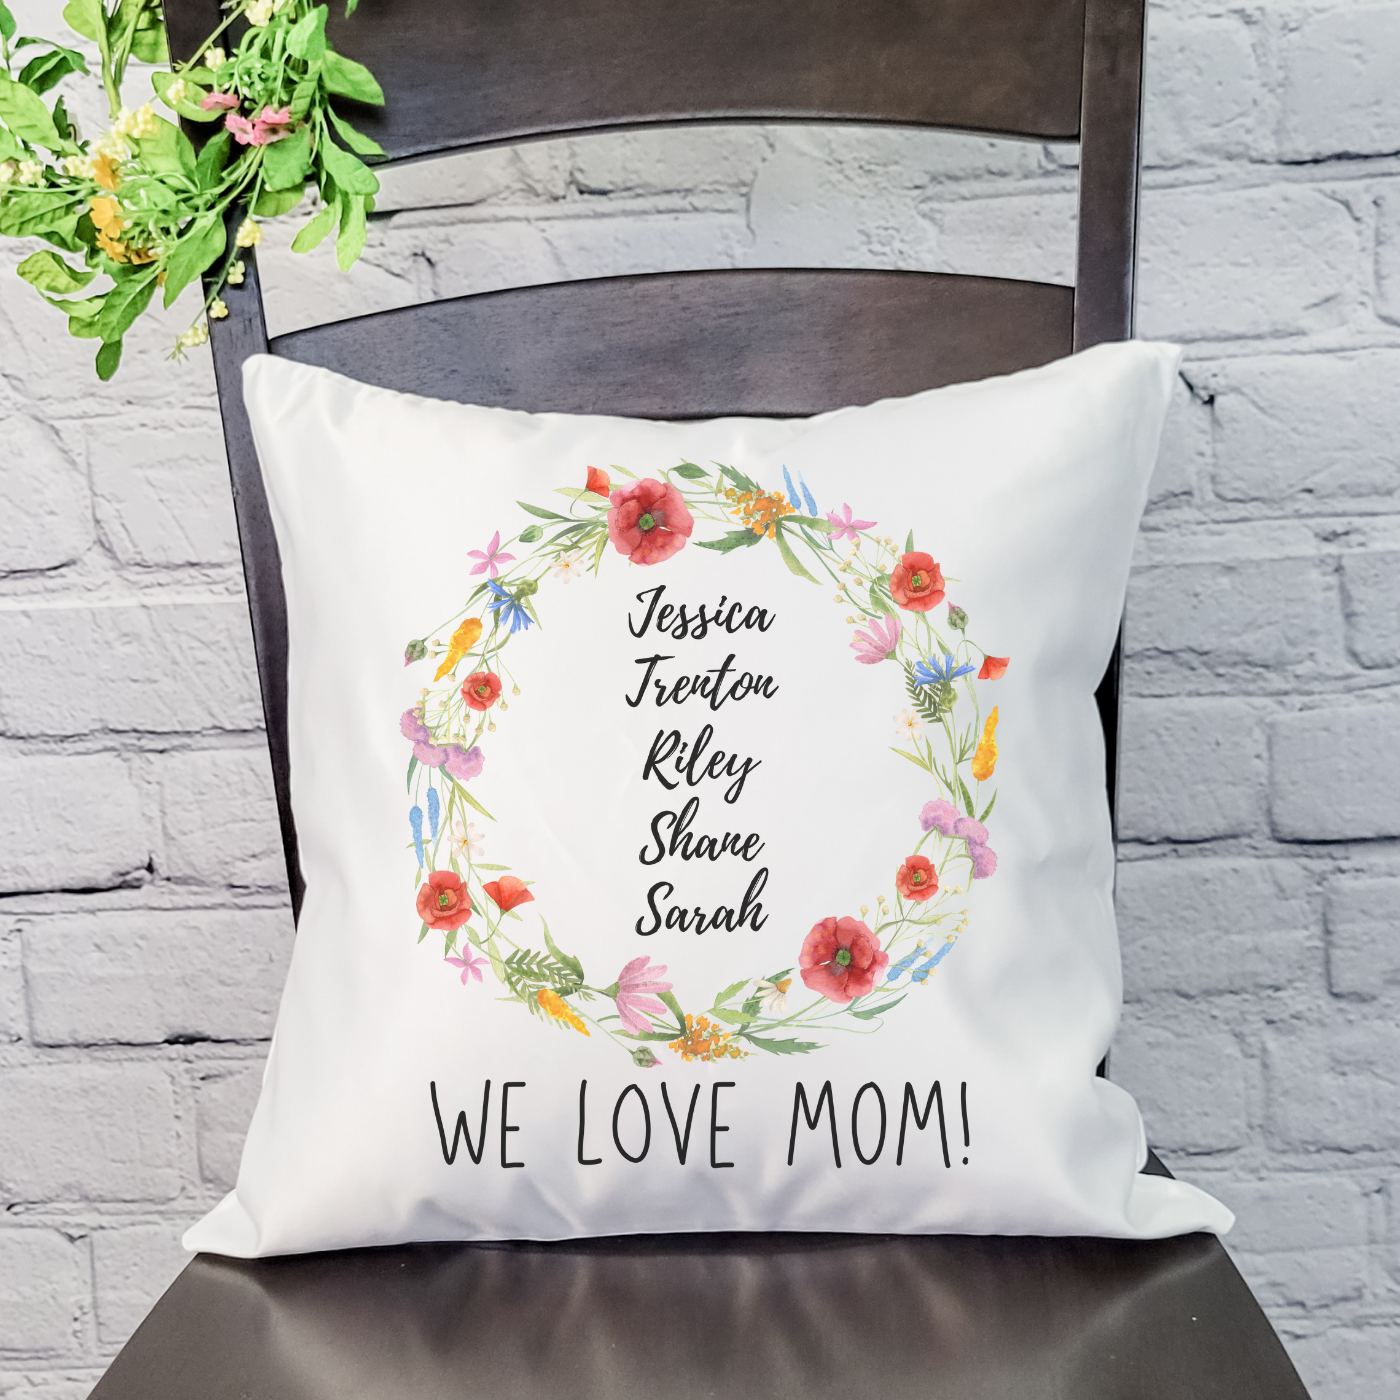 Personalized We Love Mom Pillow Cover (various styles)